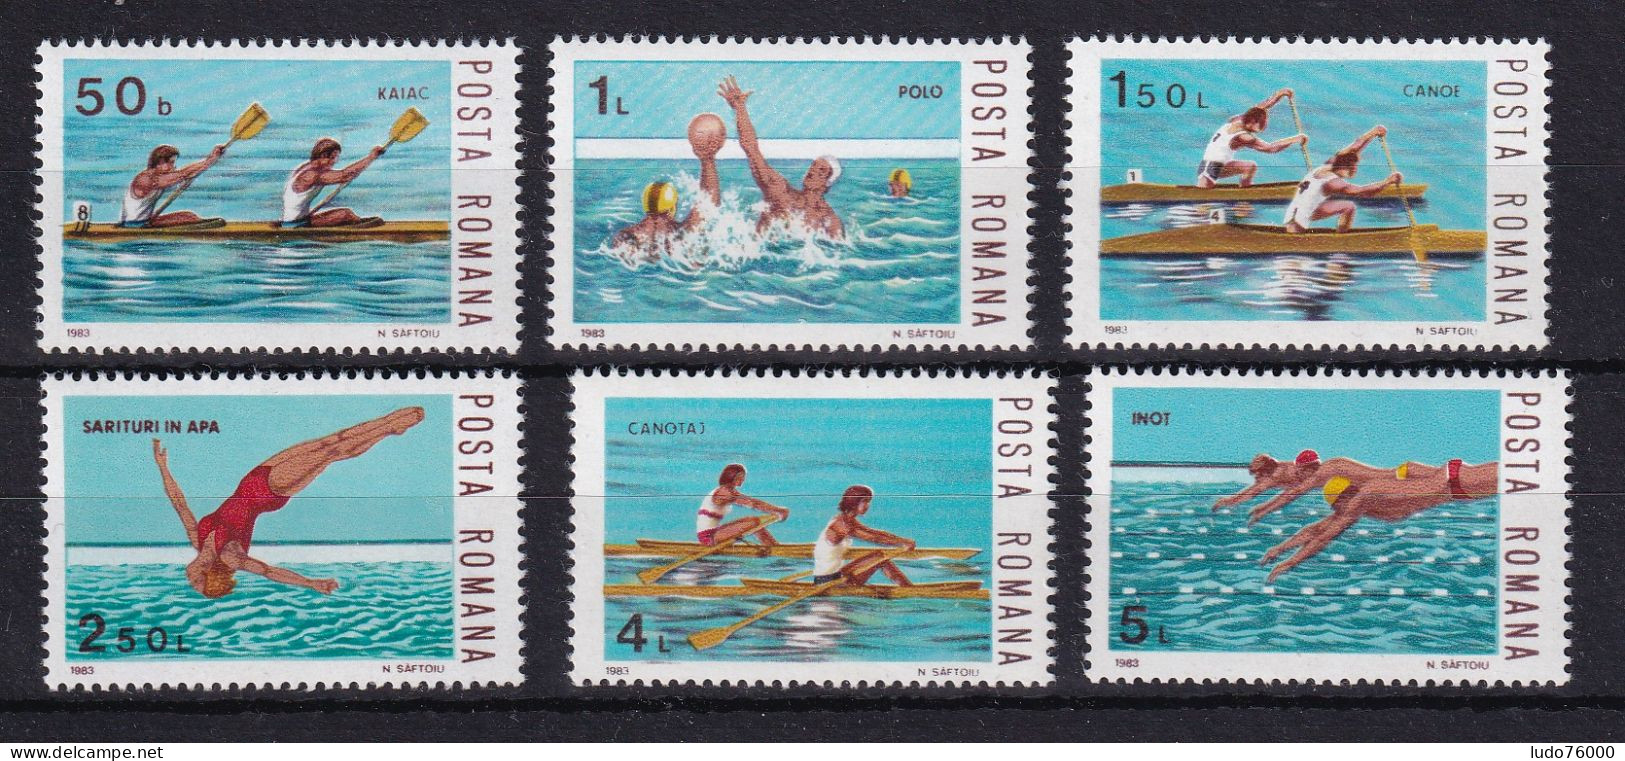 D 785 / ROUMANIE / LOT N° 3456/3461 NEUF** COTE 6€ - Collections